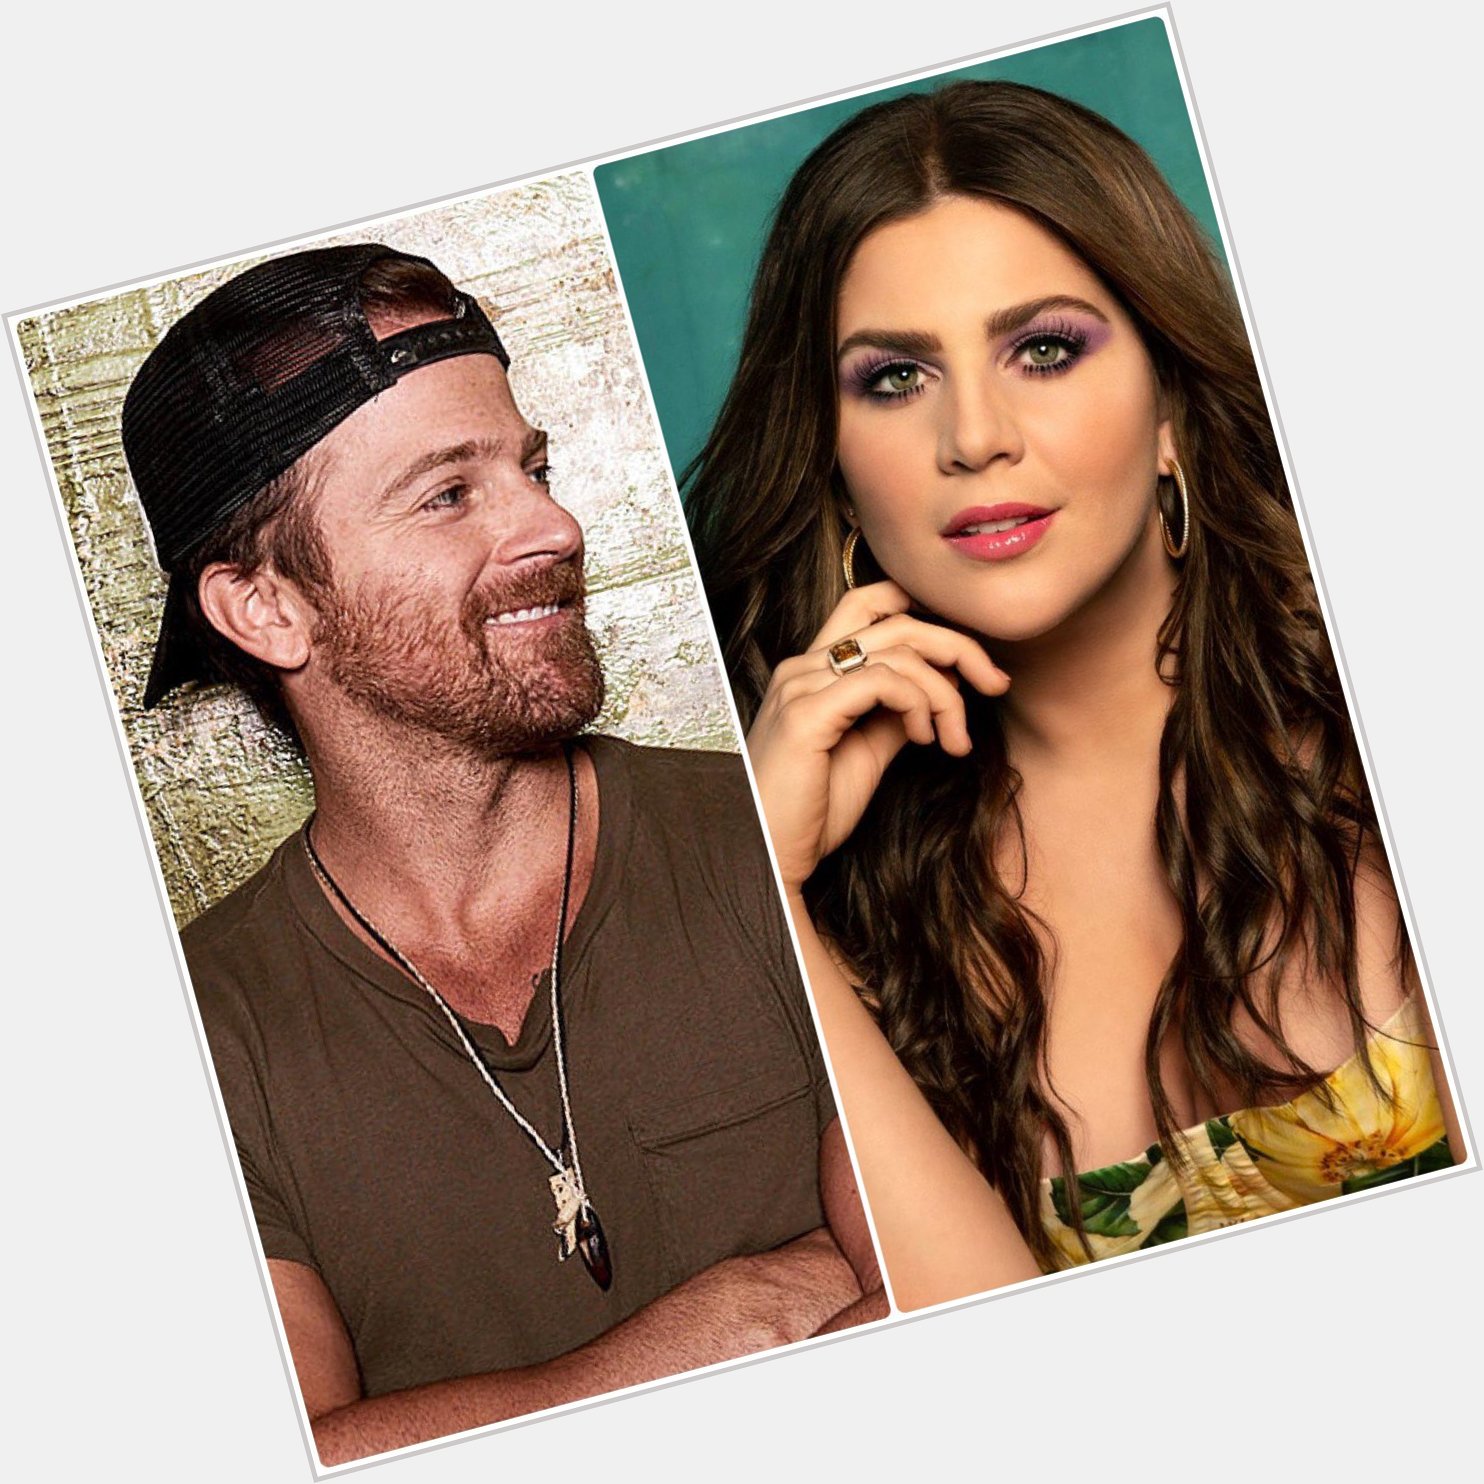 Happy birthday to Kip Moore and Hillary Scott from Lady A.  